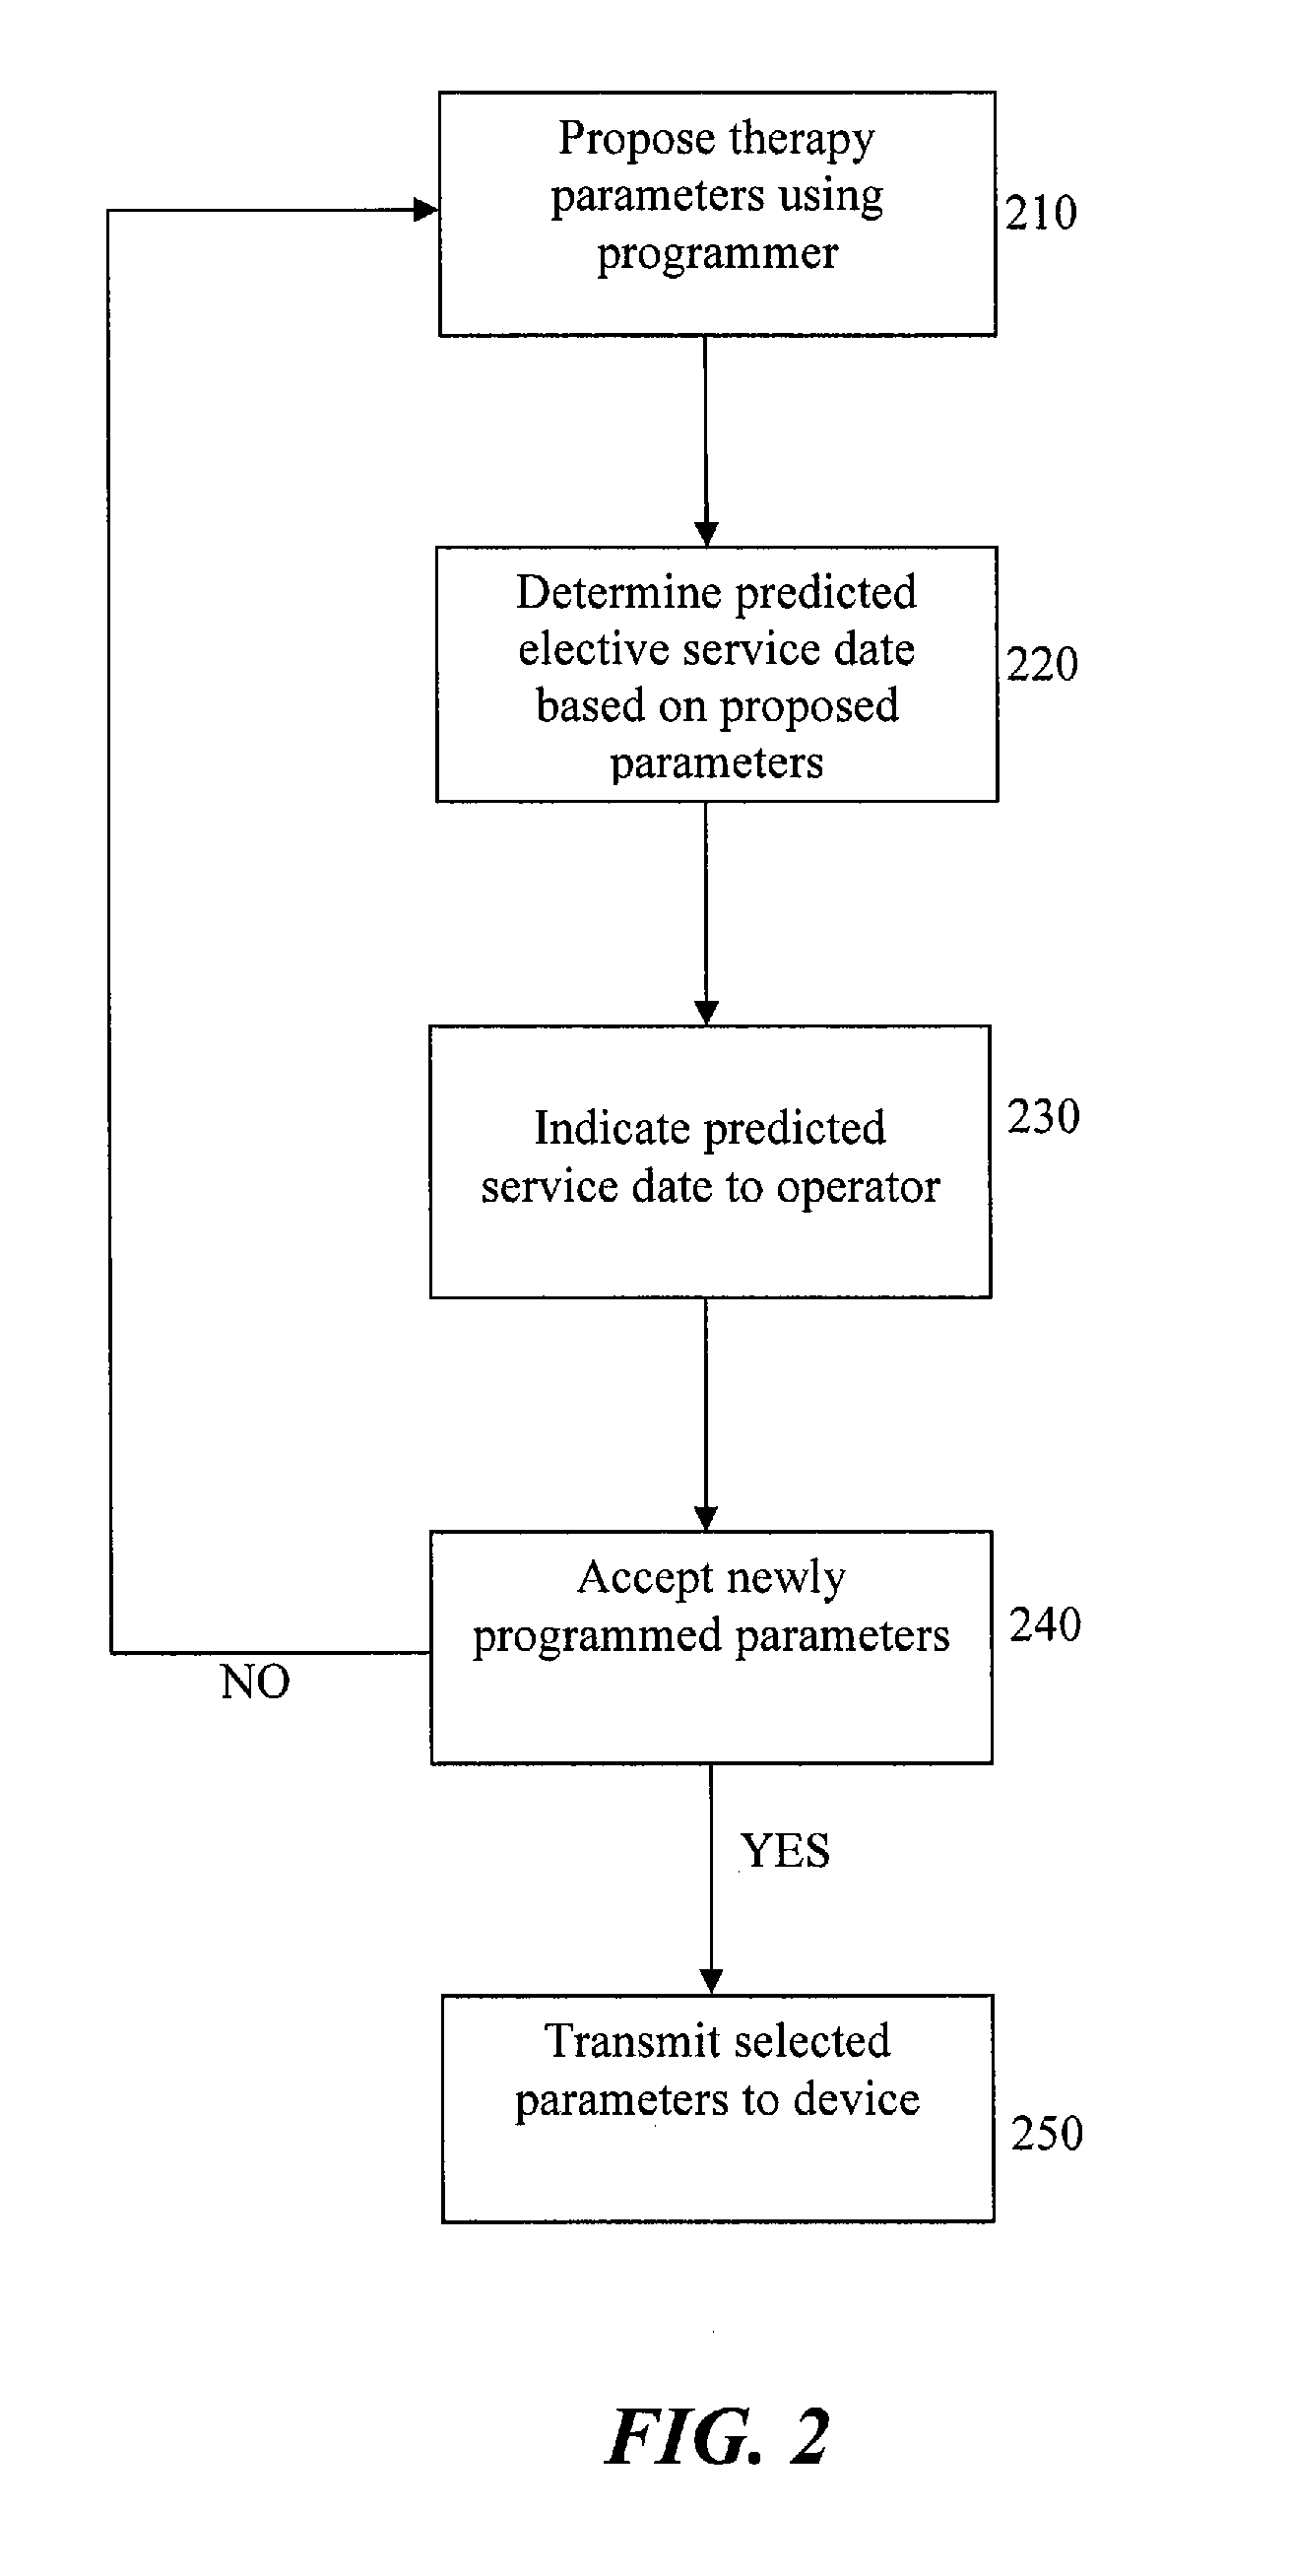 Elective service indicator based on pulse count for implantable device